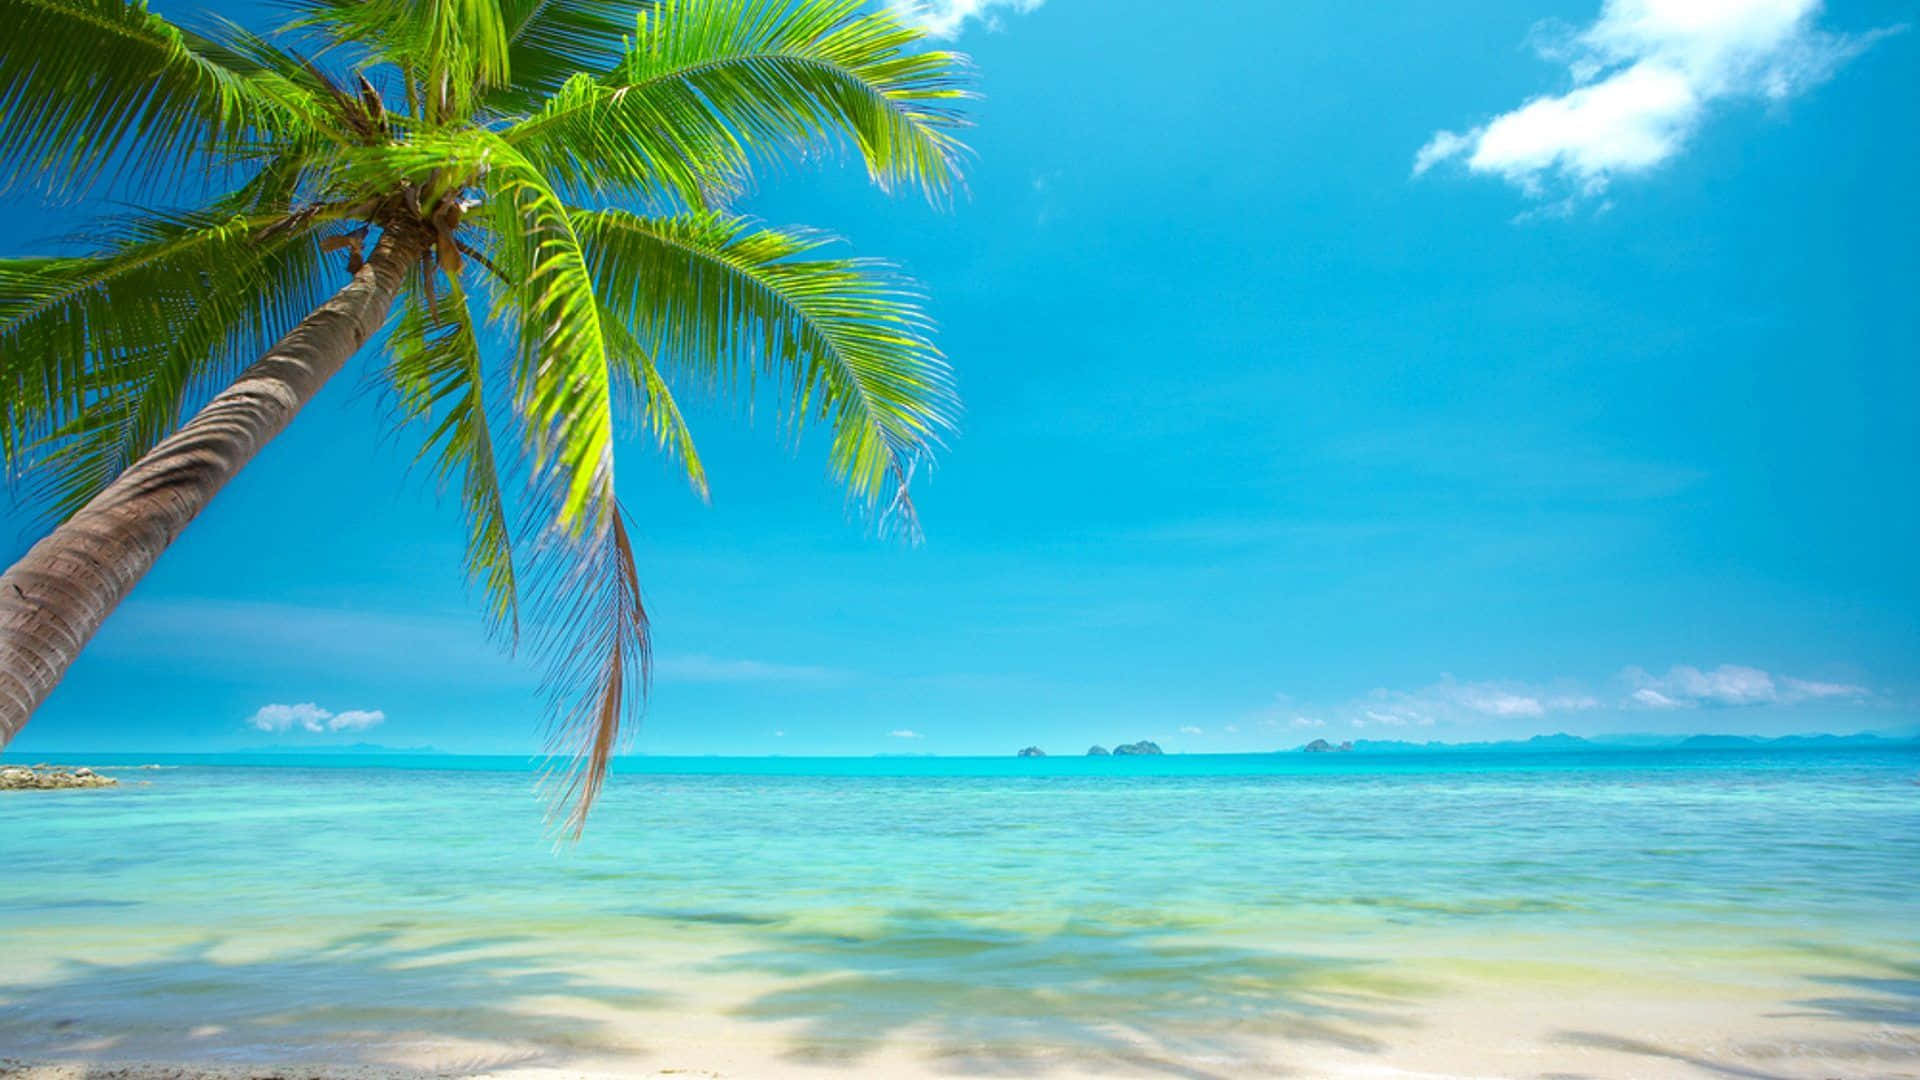 Download Breathtaking Tropical Paradise | Wallpapers.com